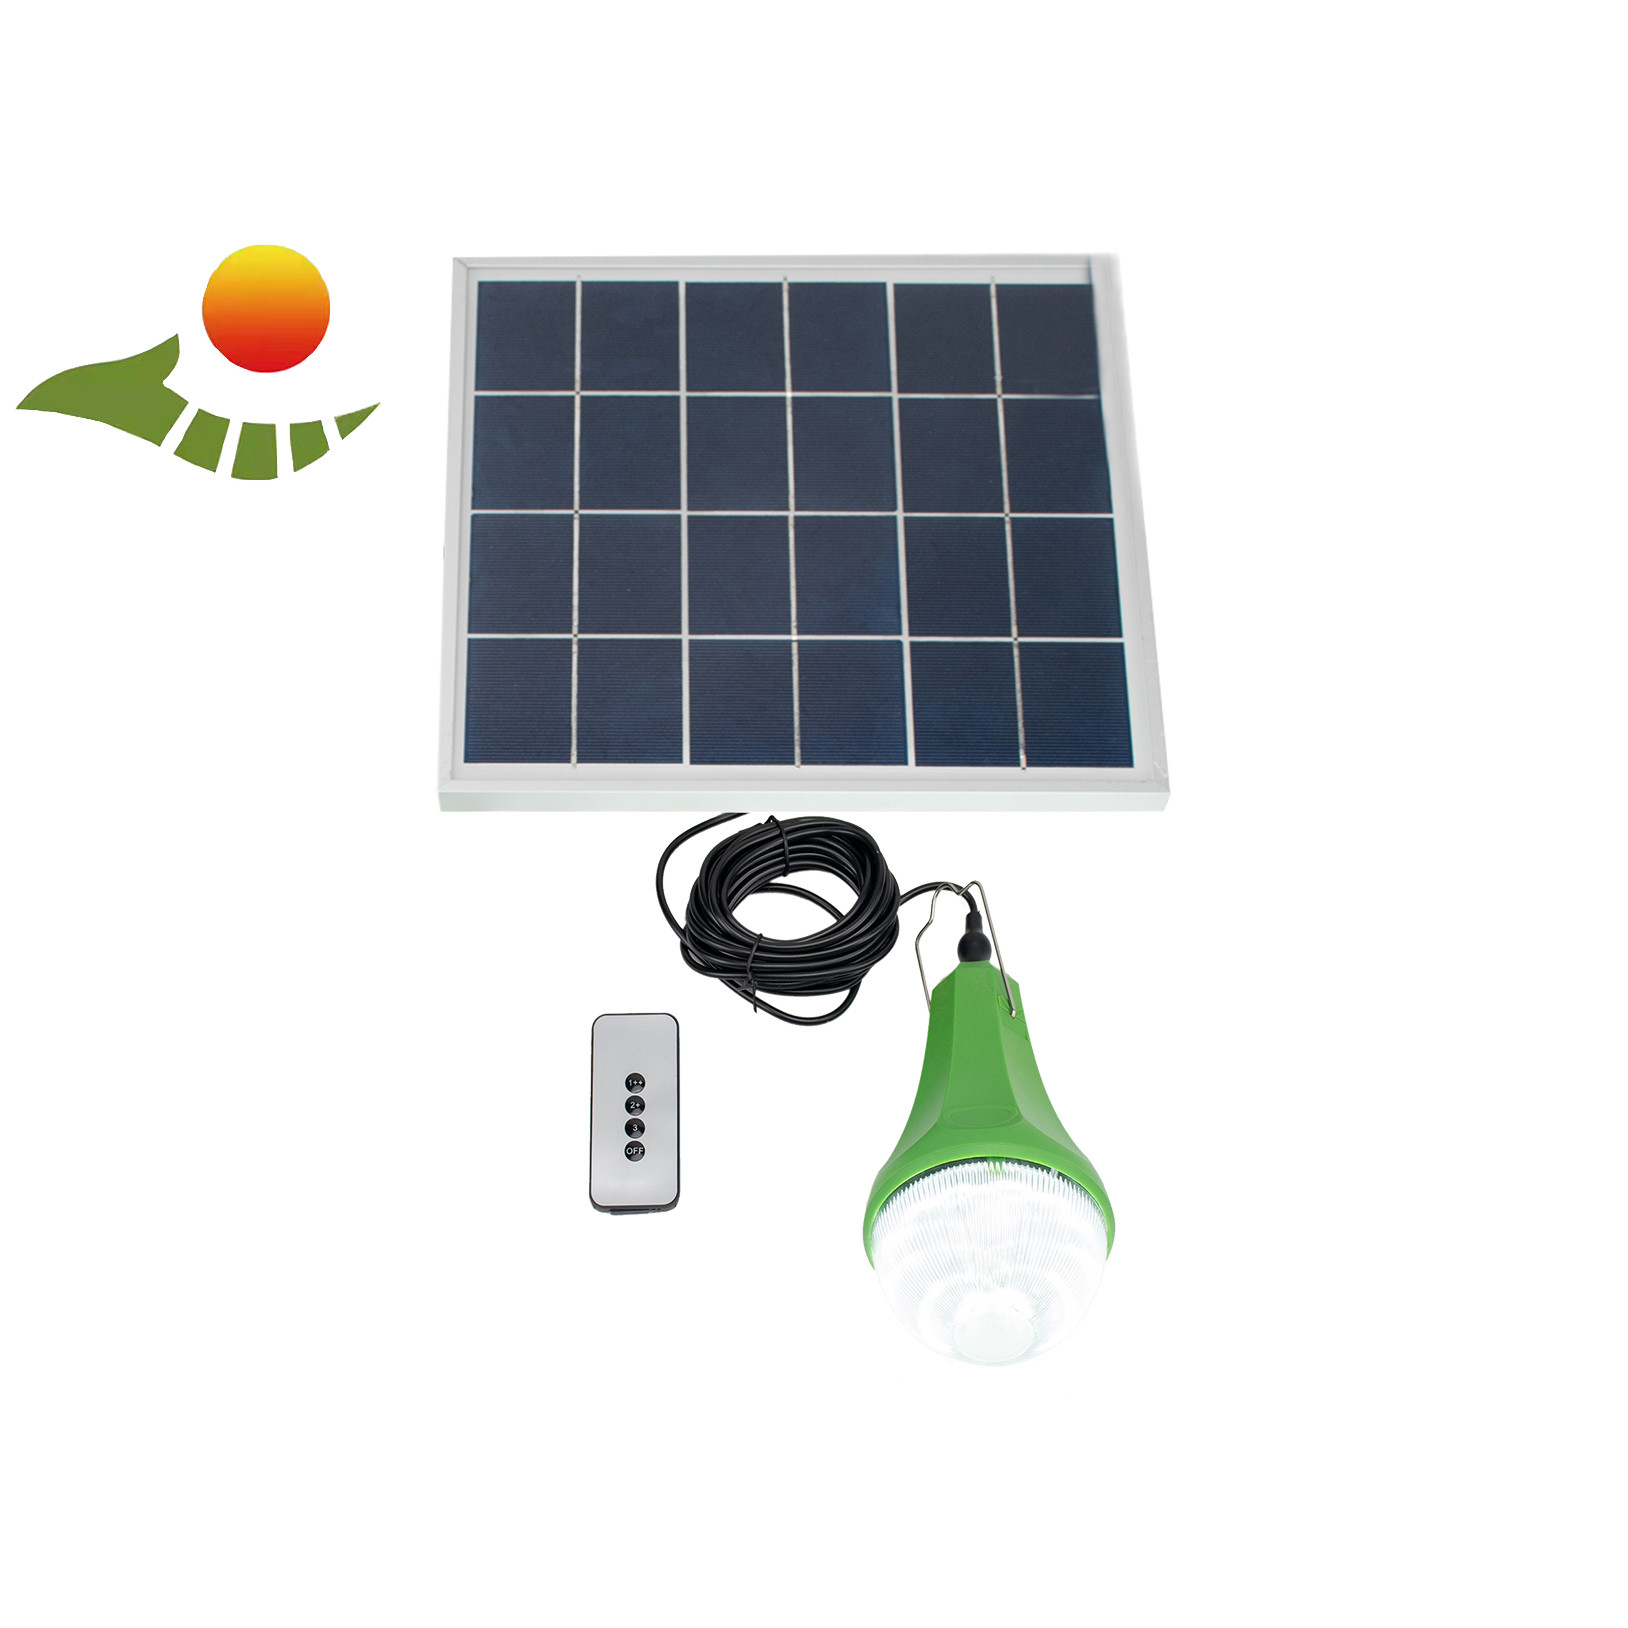 Portable Led Lamps 2600mah Solar Panel Energy System For Homes